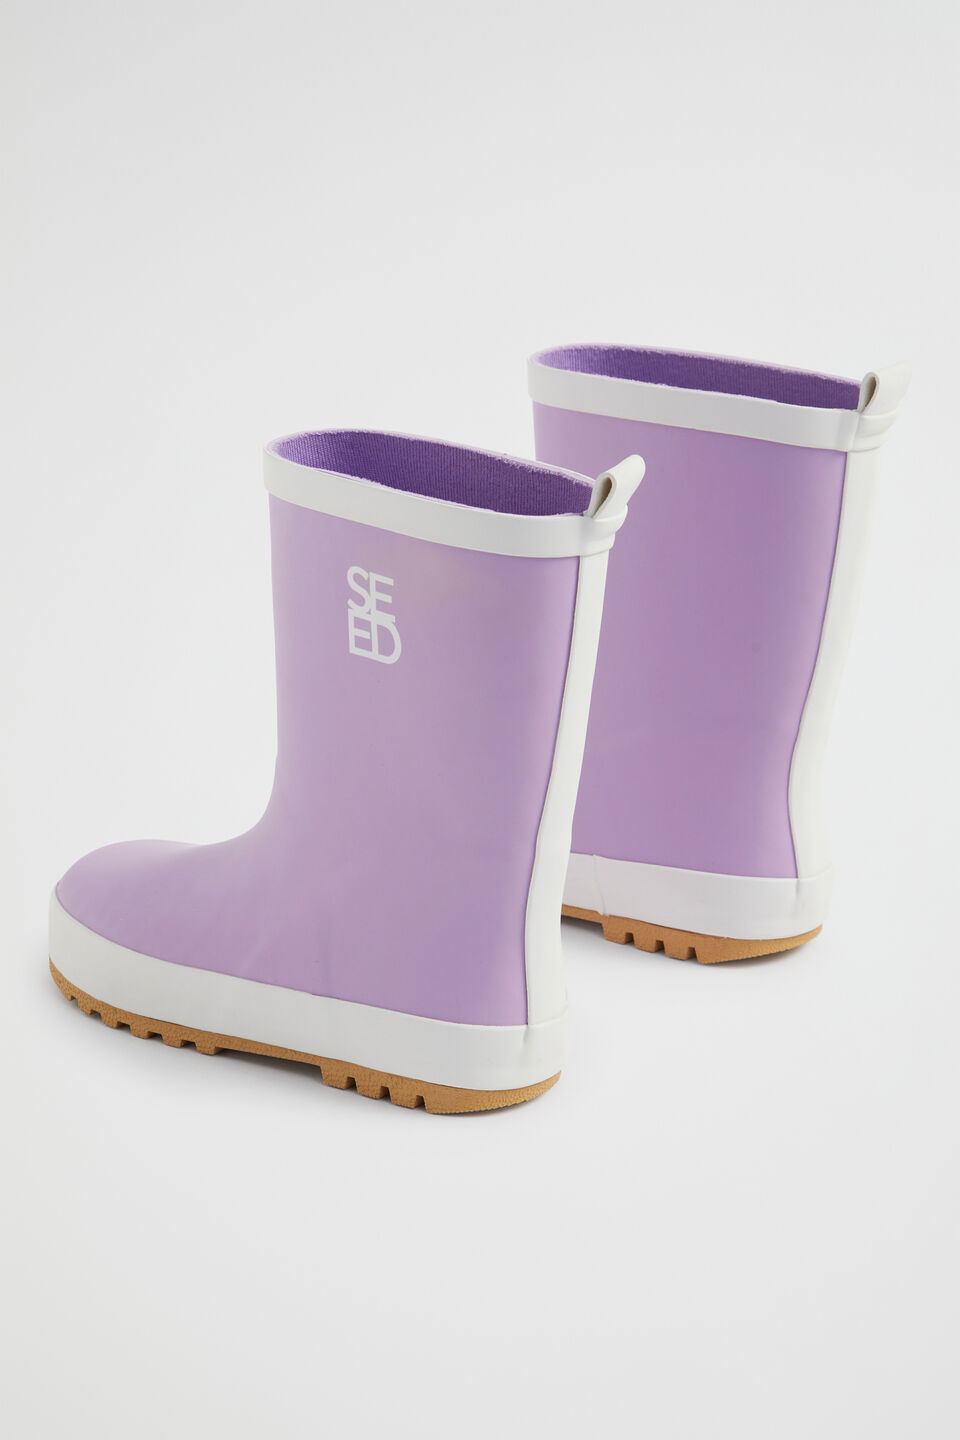 Seed Logo Rubber Gumboot  Lilac